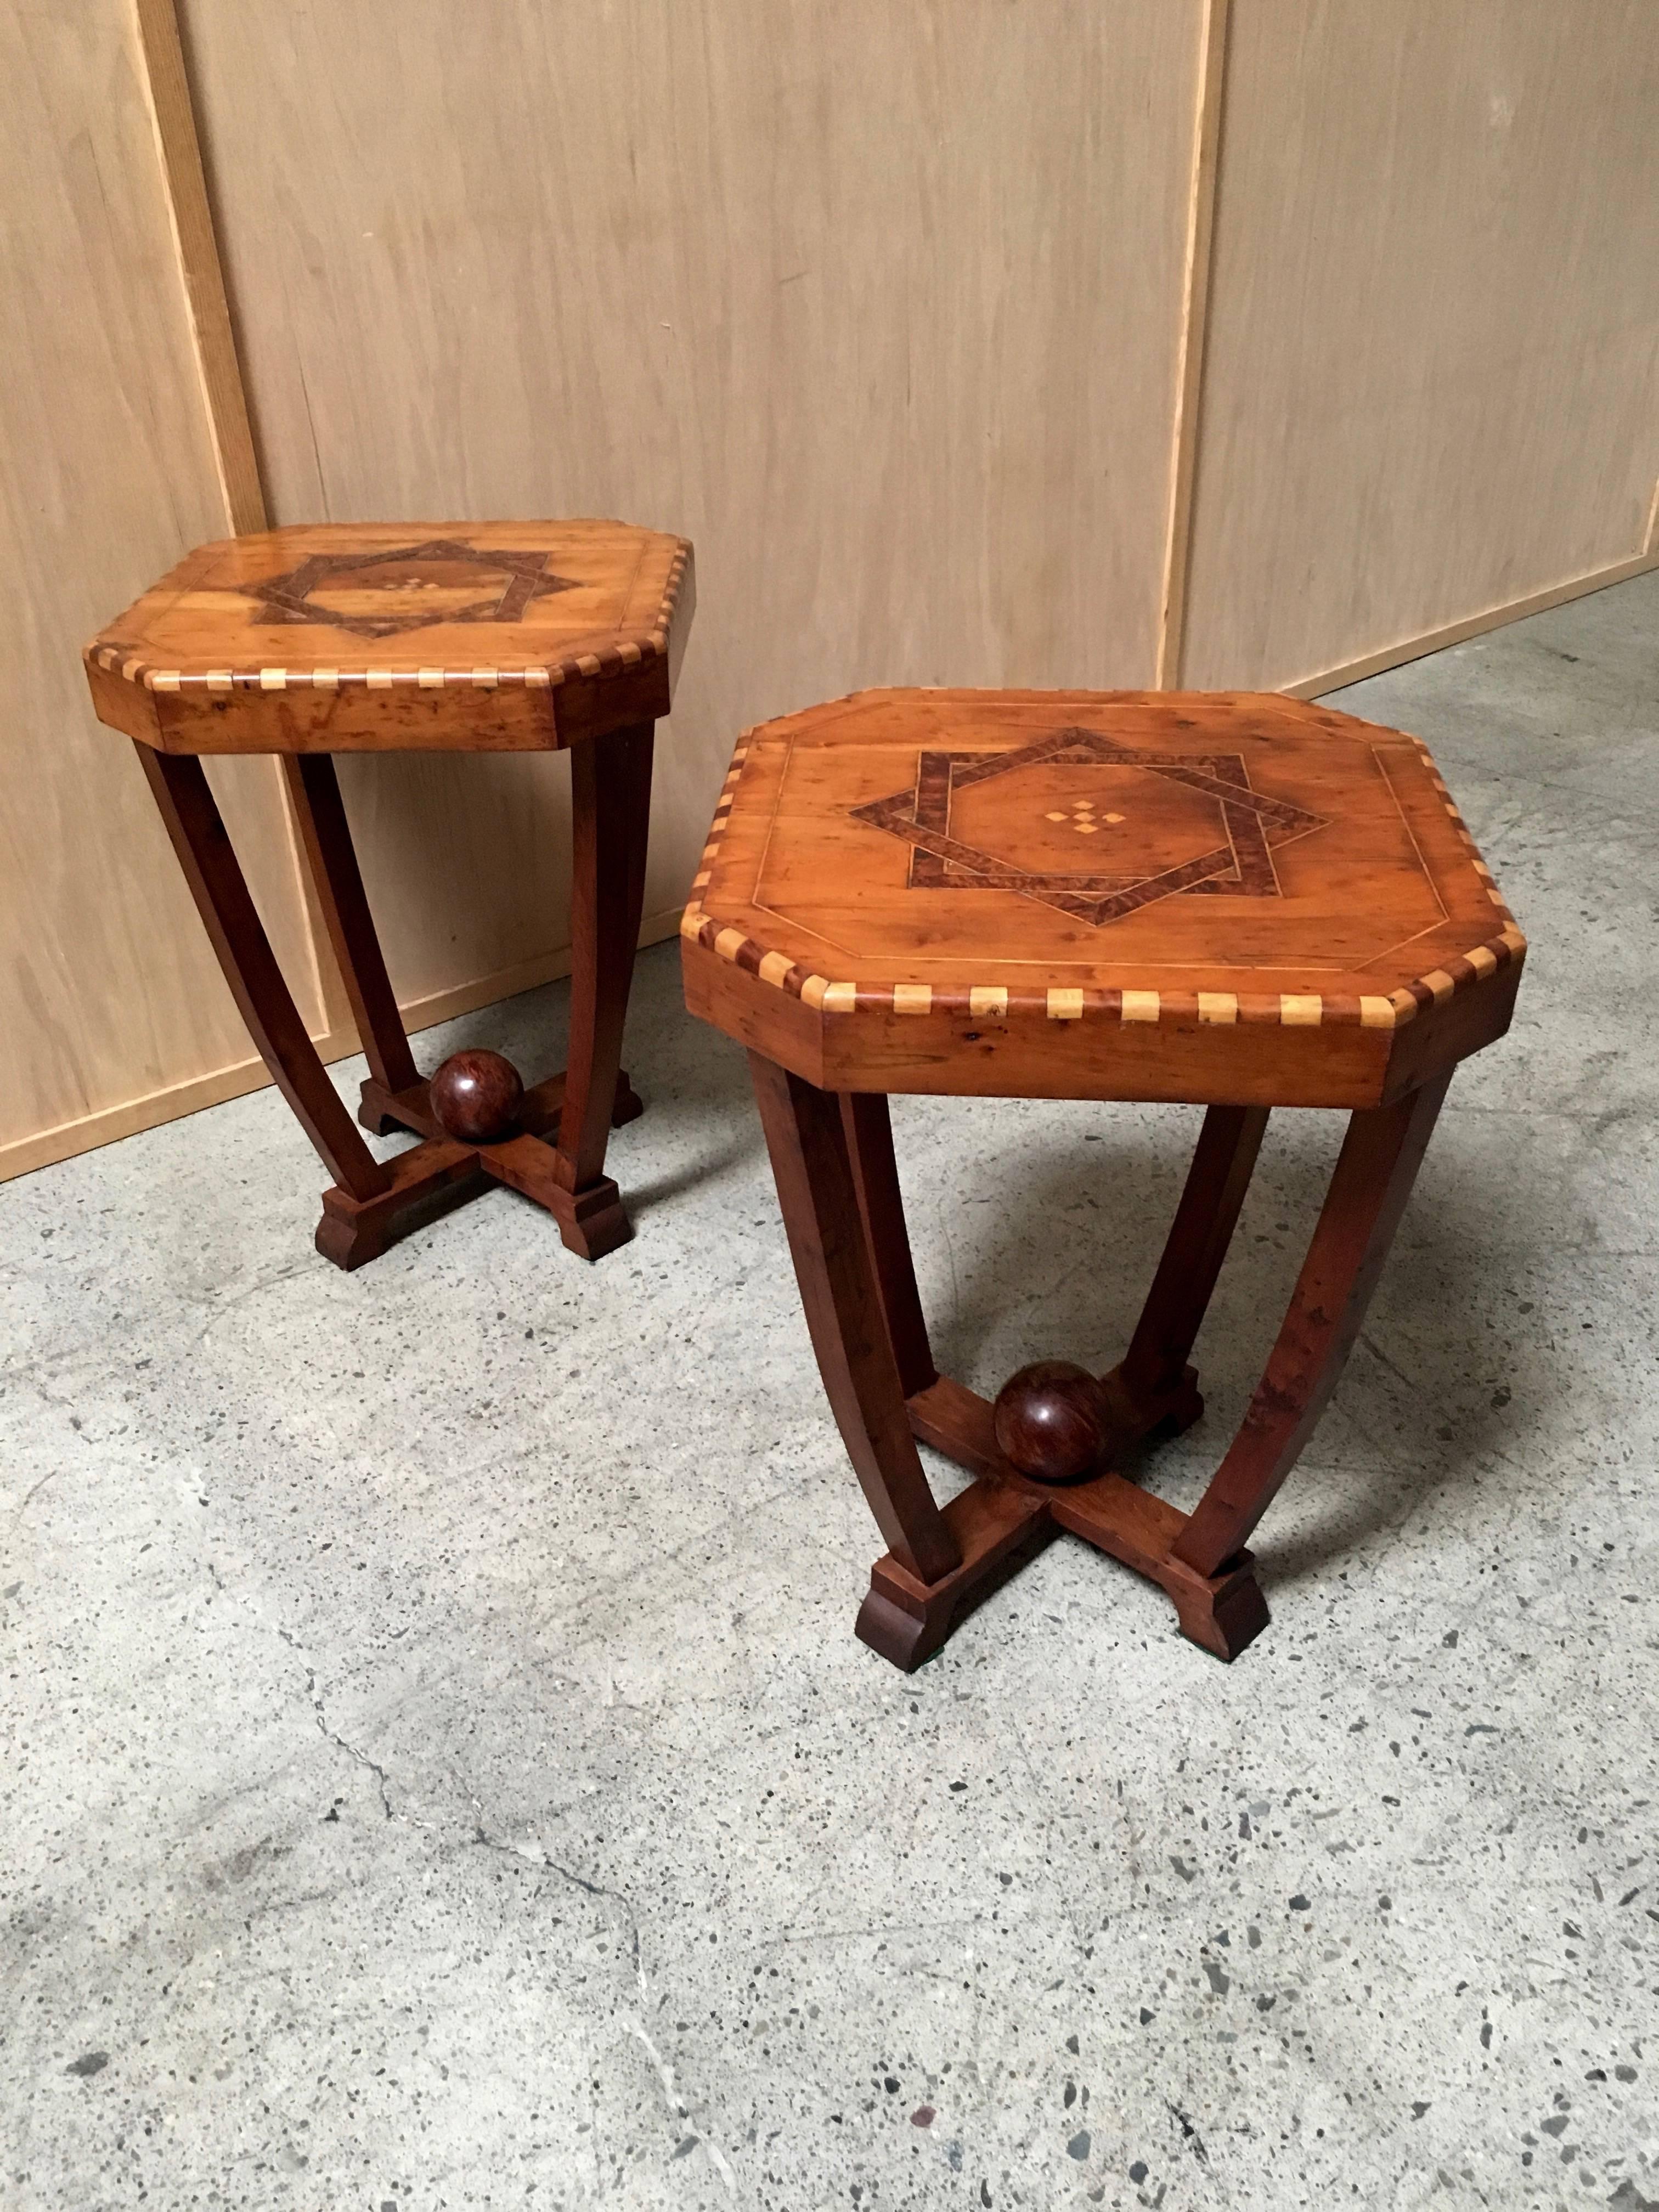 Pair of Art Deco side tables with a combination of woods wild cherry, burl wood, apple.